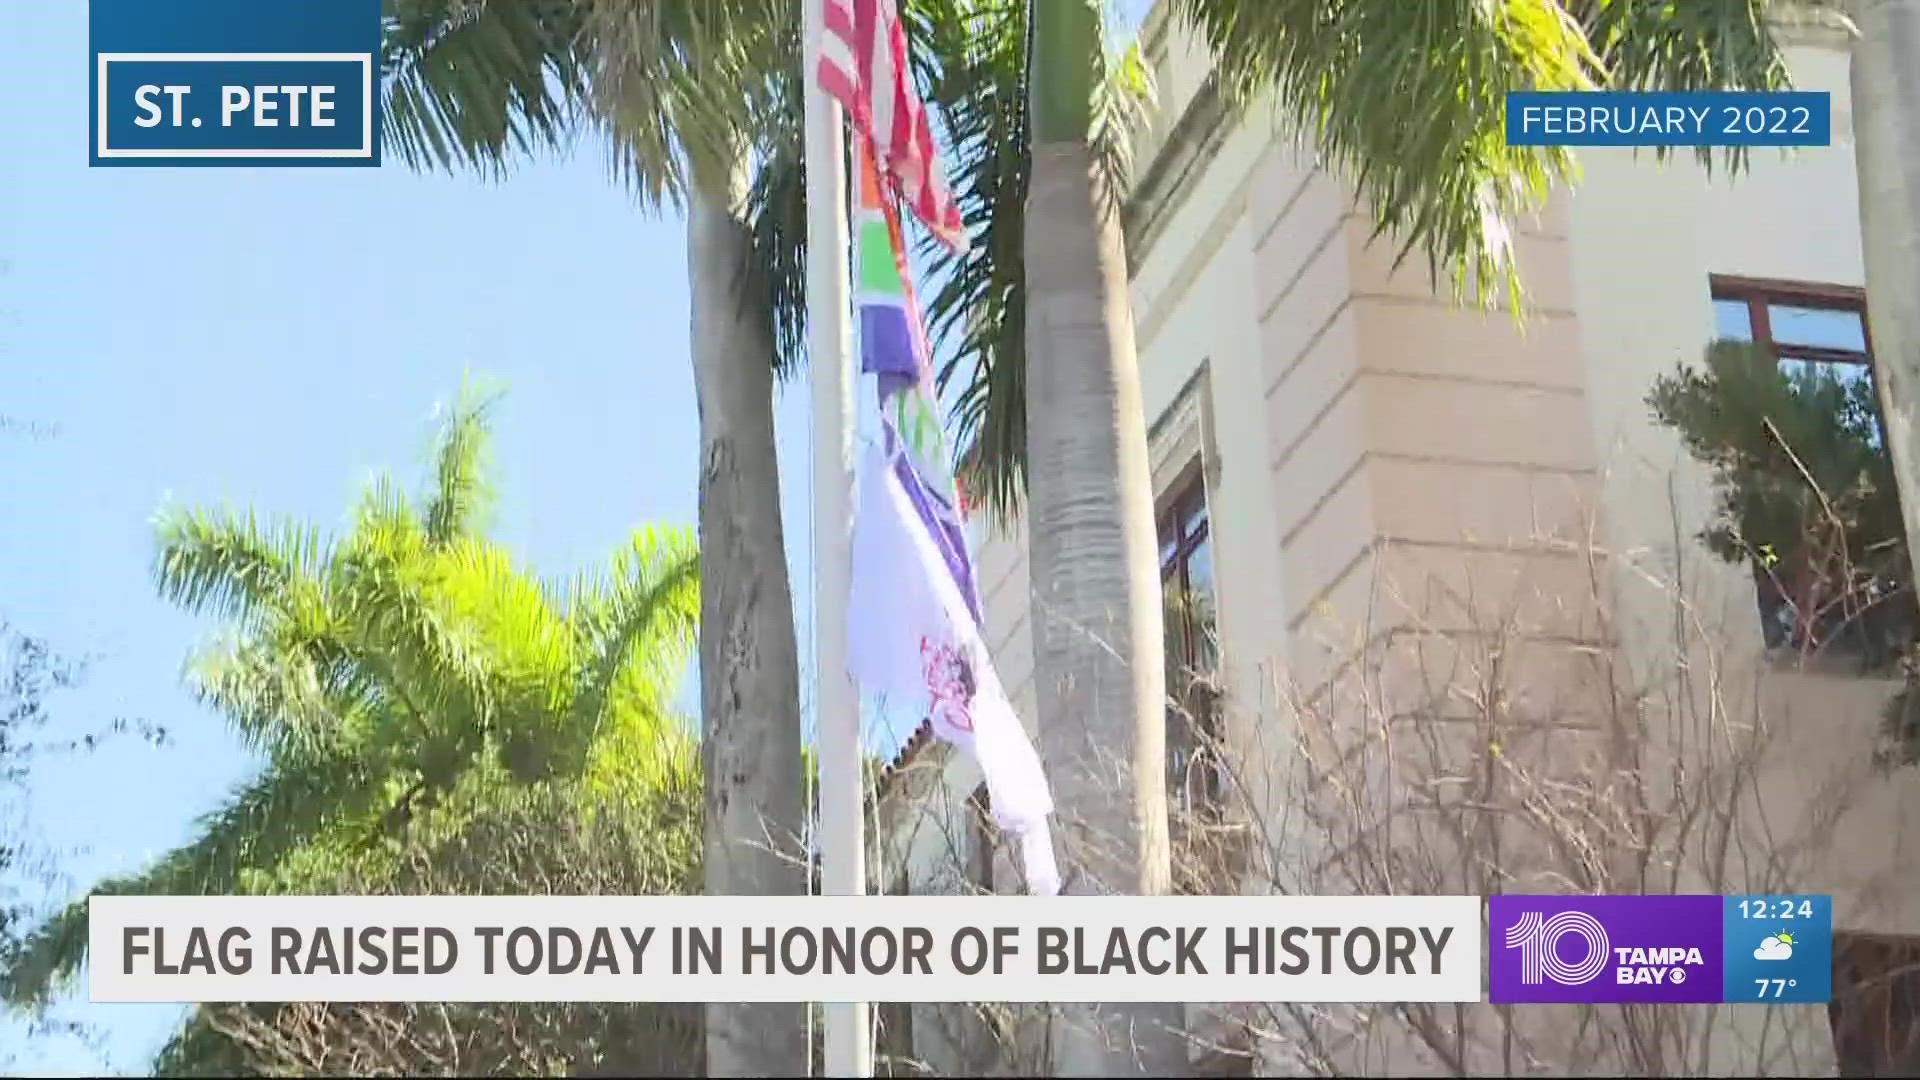 The flag will fly outside of St. Pete City Hall.